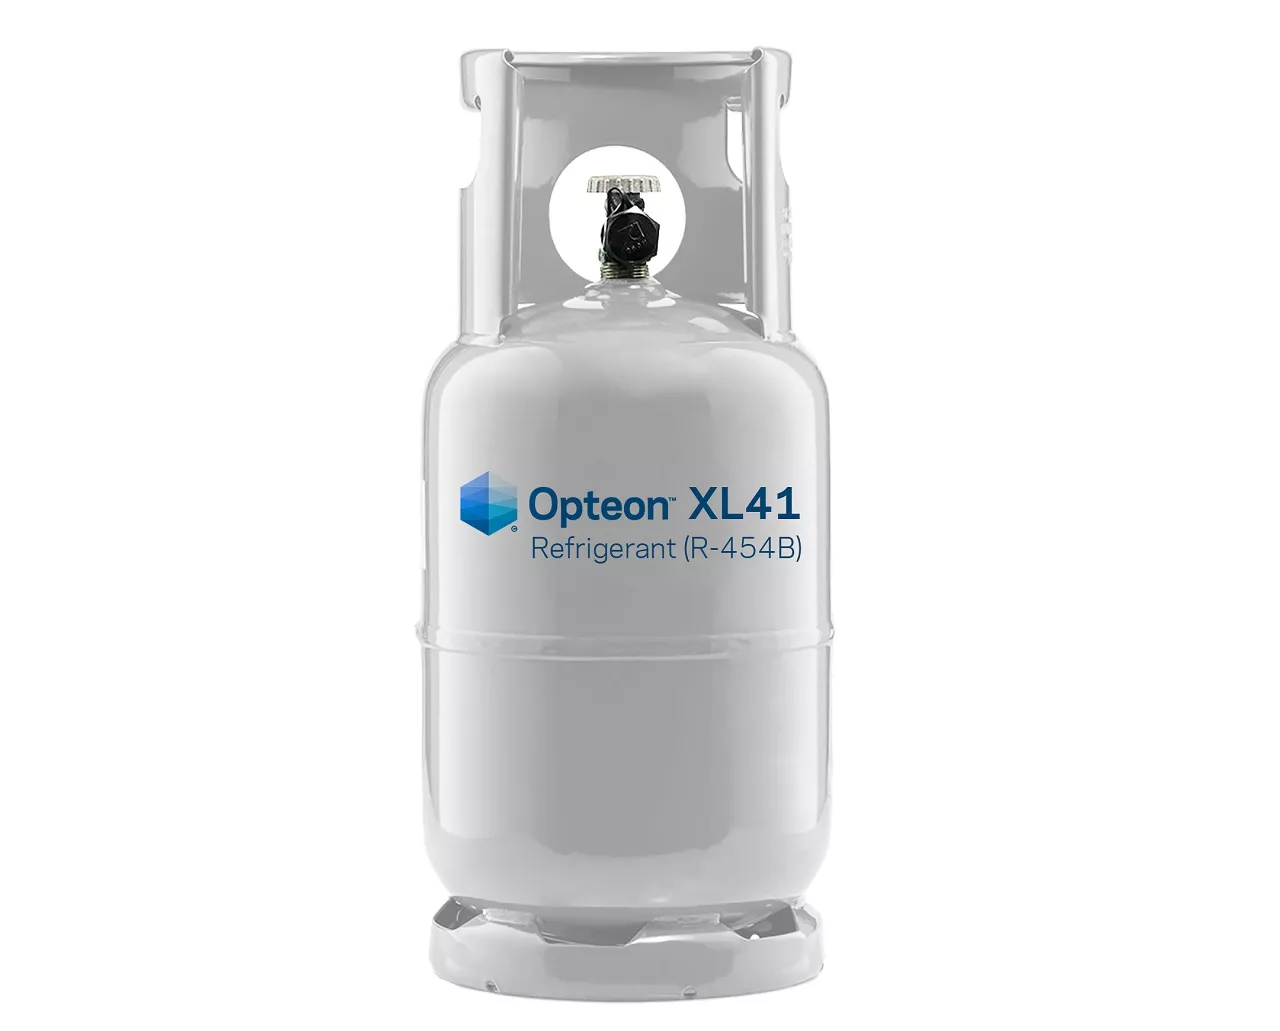 Chemours Now Taking Orders in North America for Opteon XL41 Zero ODP